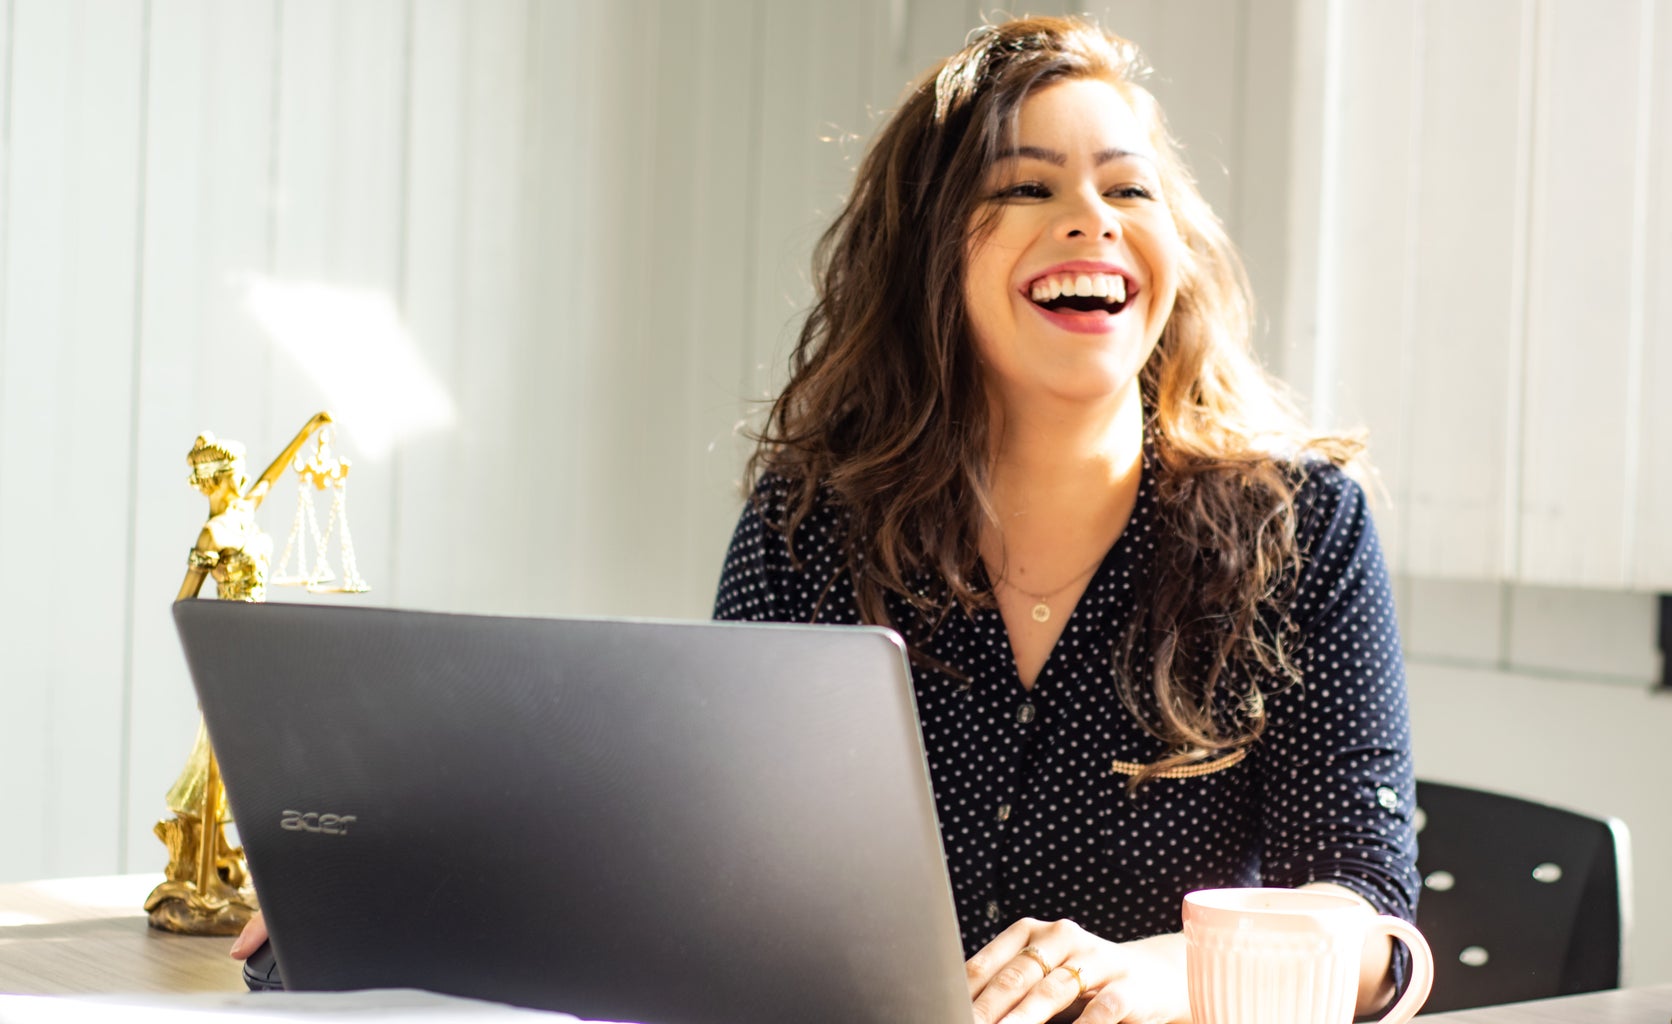 Woman laughs while working on computer.